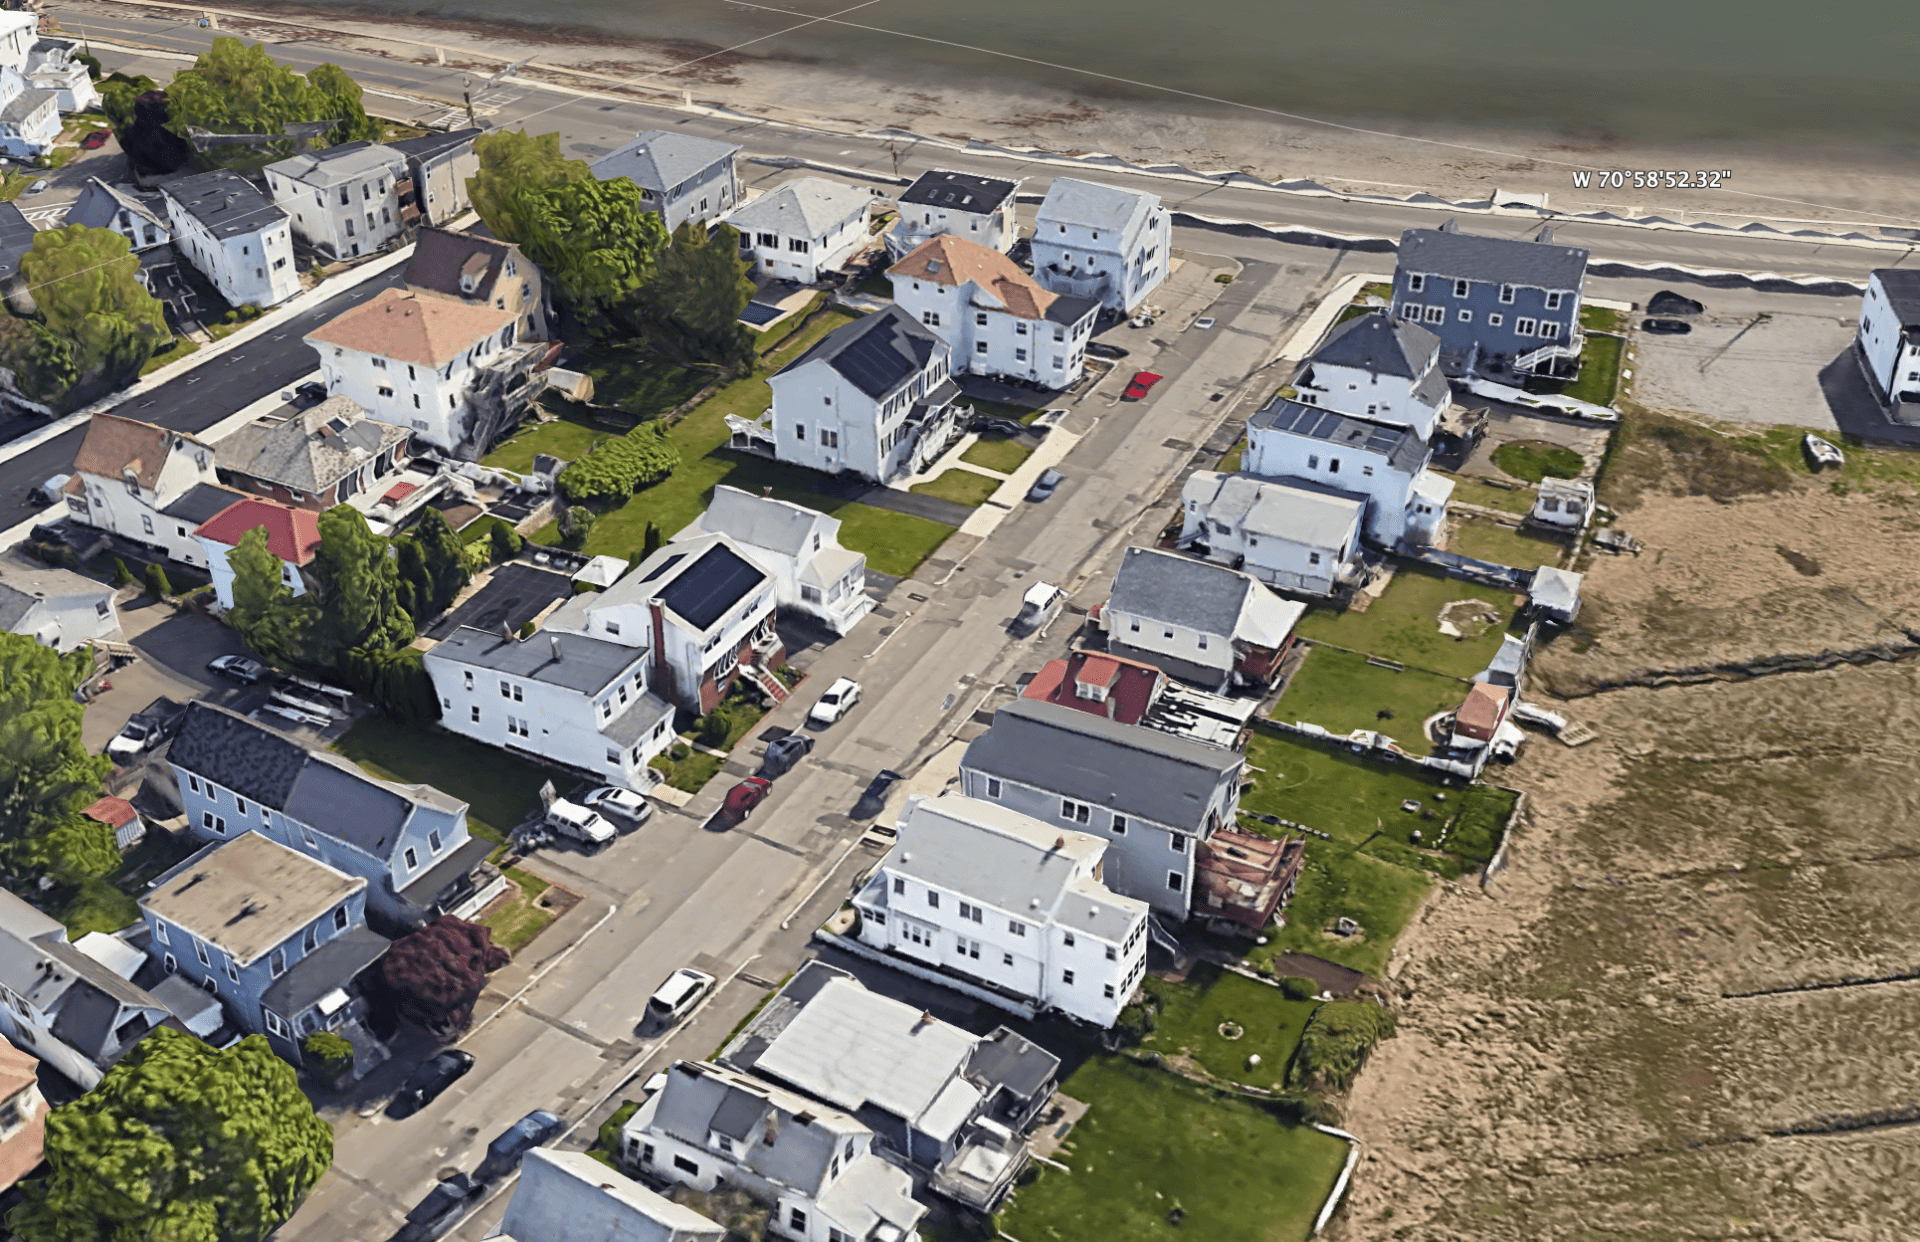 Pearl Ave makes a &quot;T&quot; with Winthrop Parkway, which runs along the coastline. (Google Earth)